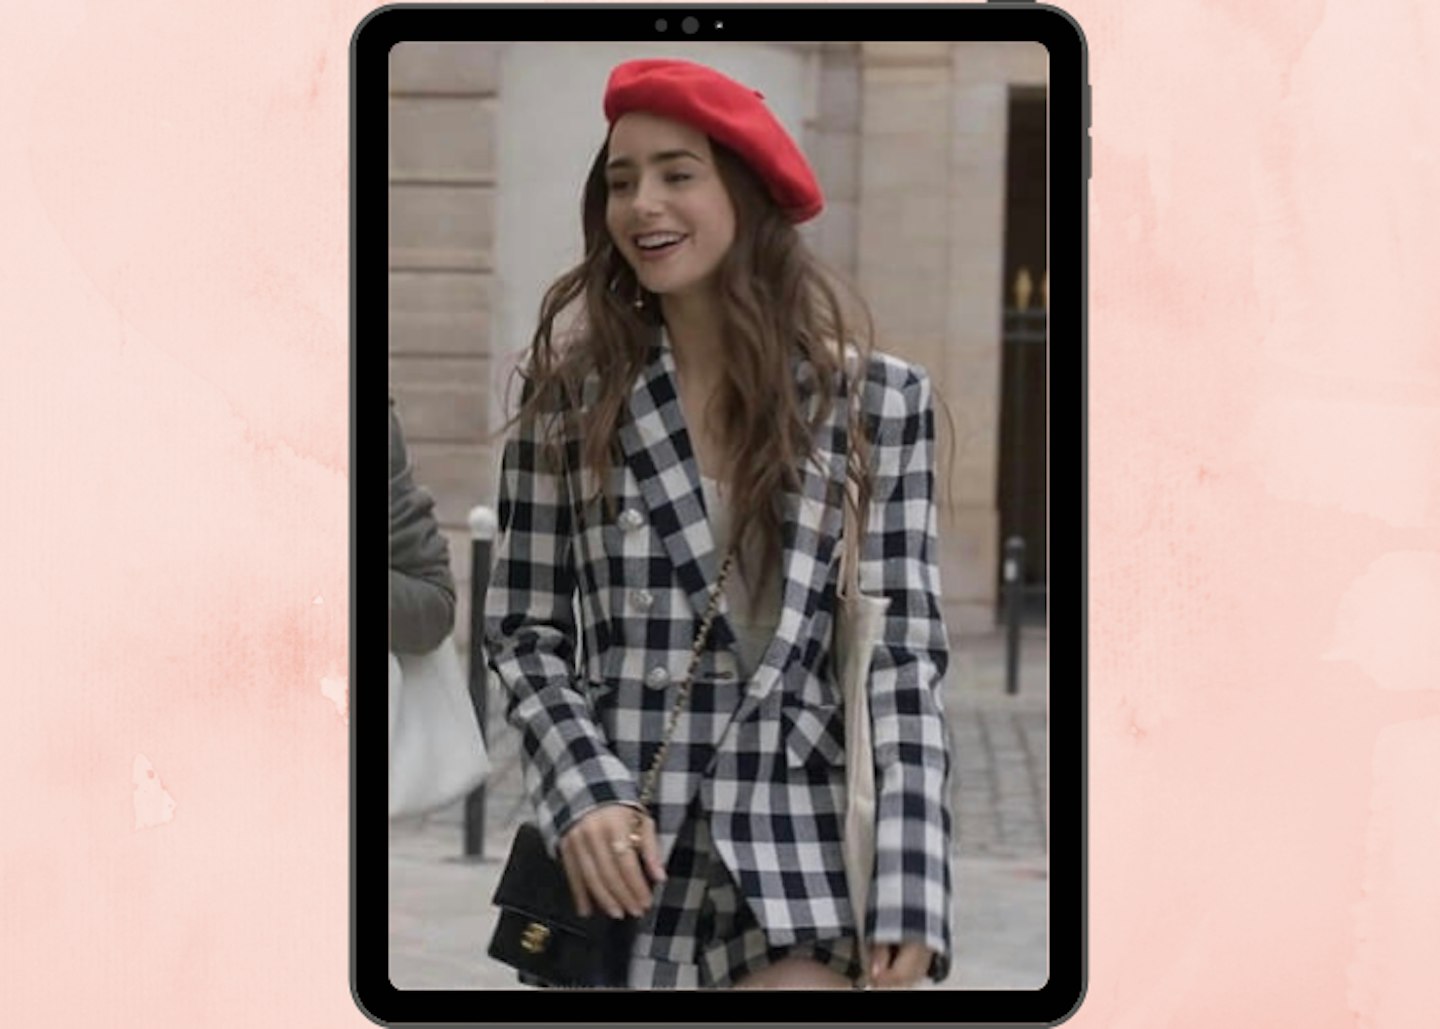 emily in paris season 1 episode 3 outfit red beret checkered jacket